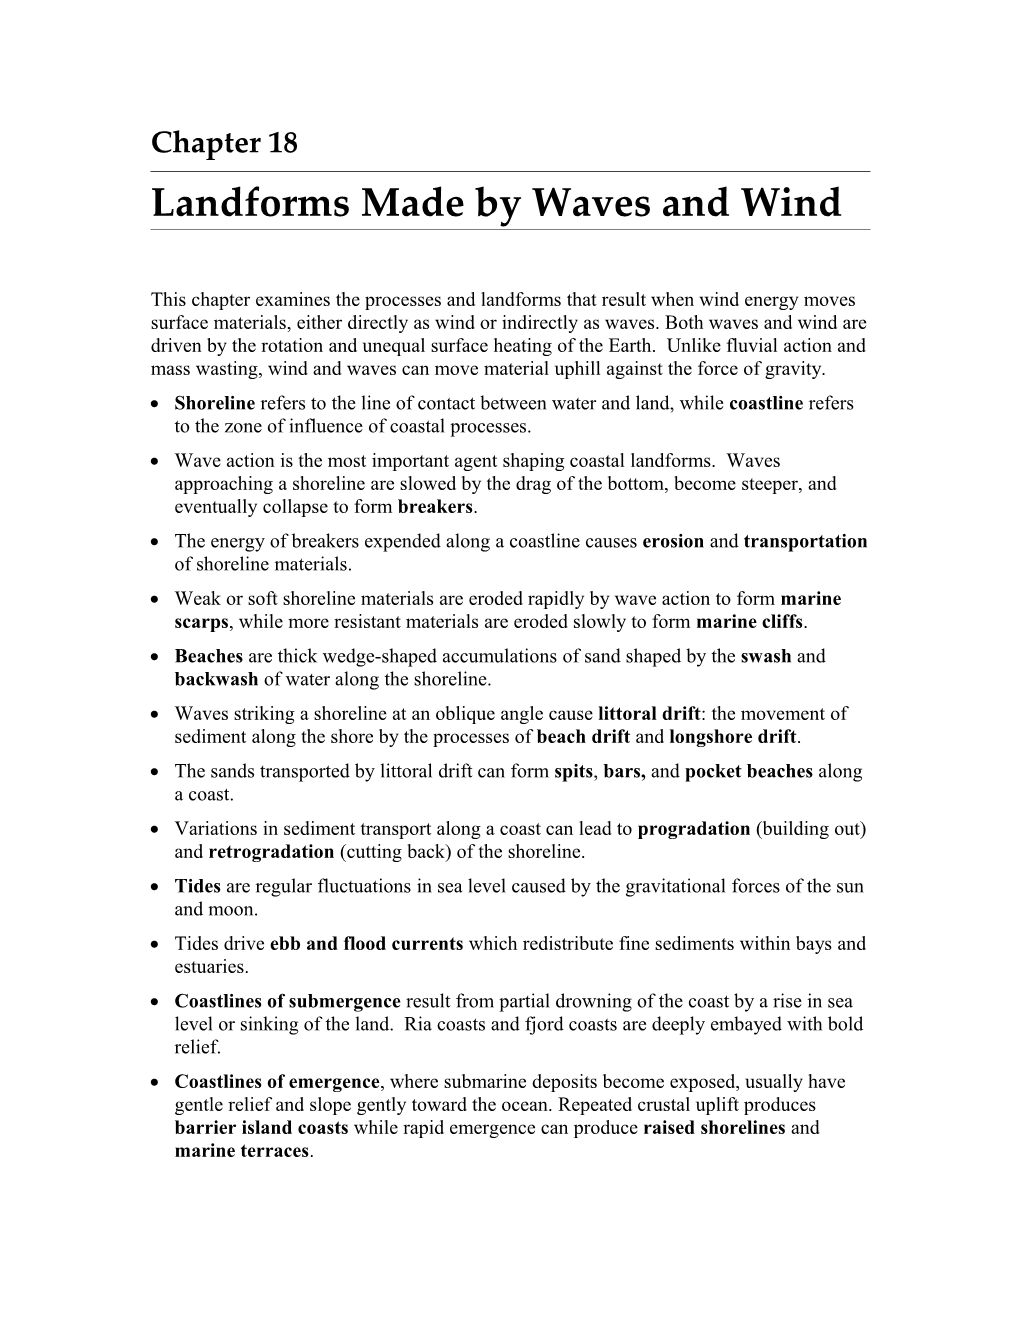 Landforms Made by Waves and Wind